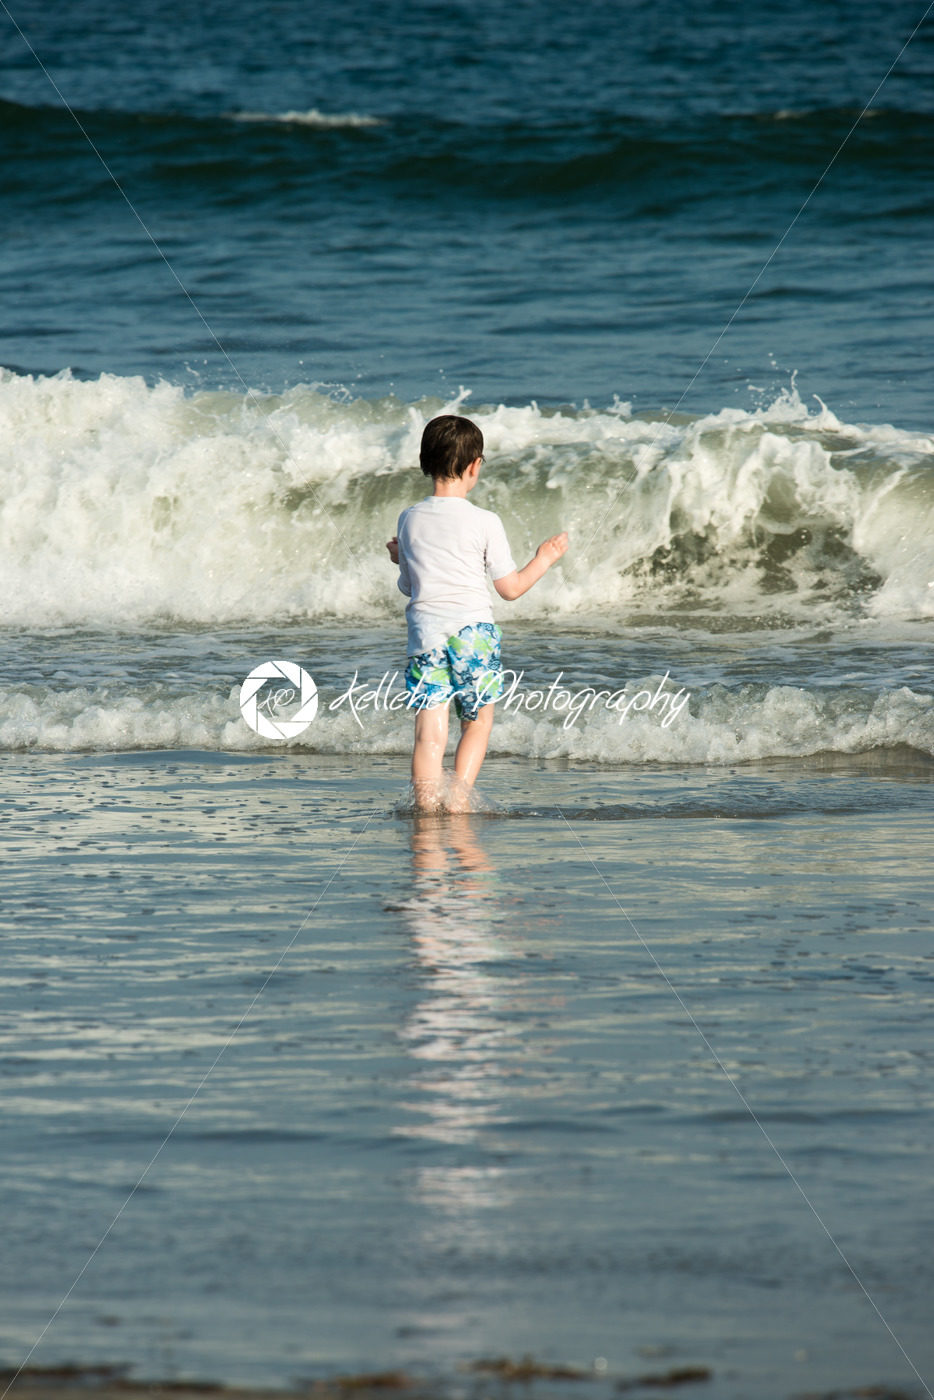 Young cute little boy playing at the seaside running into the surf on a sandy beach in summer sunshine - Kelleher Photography Store